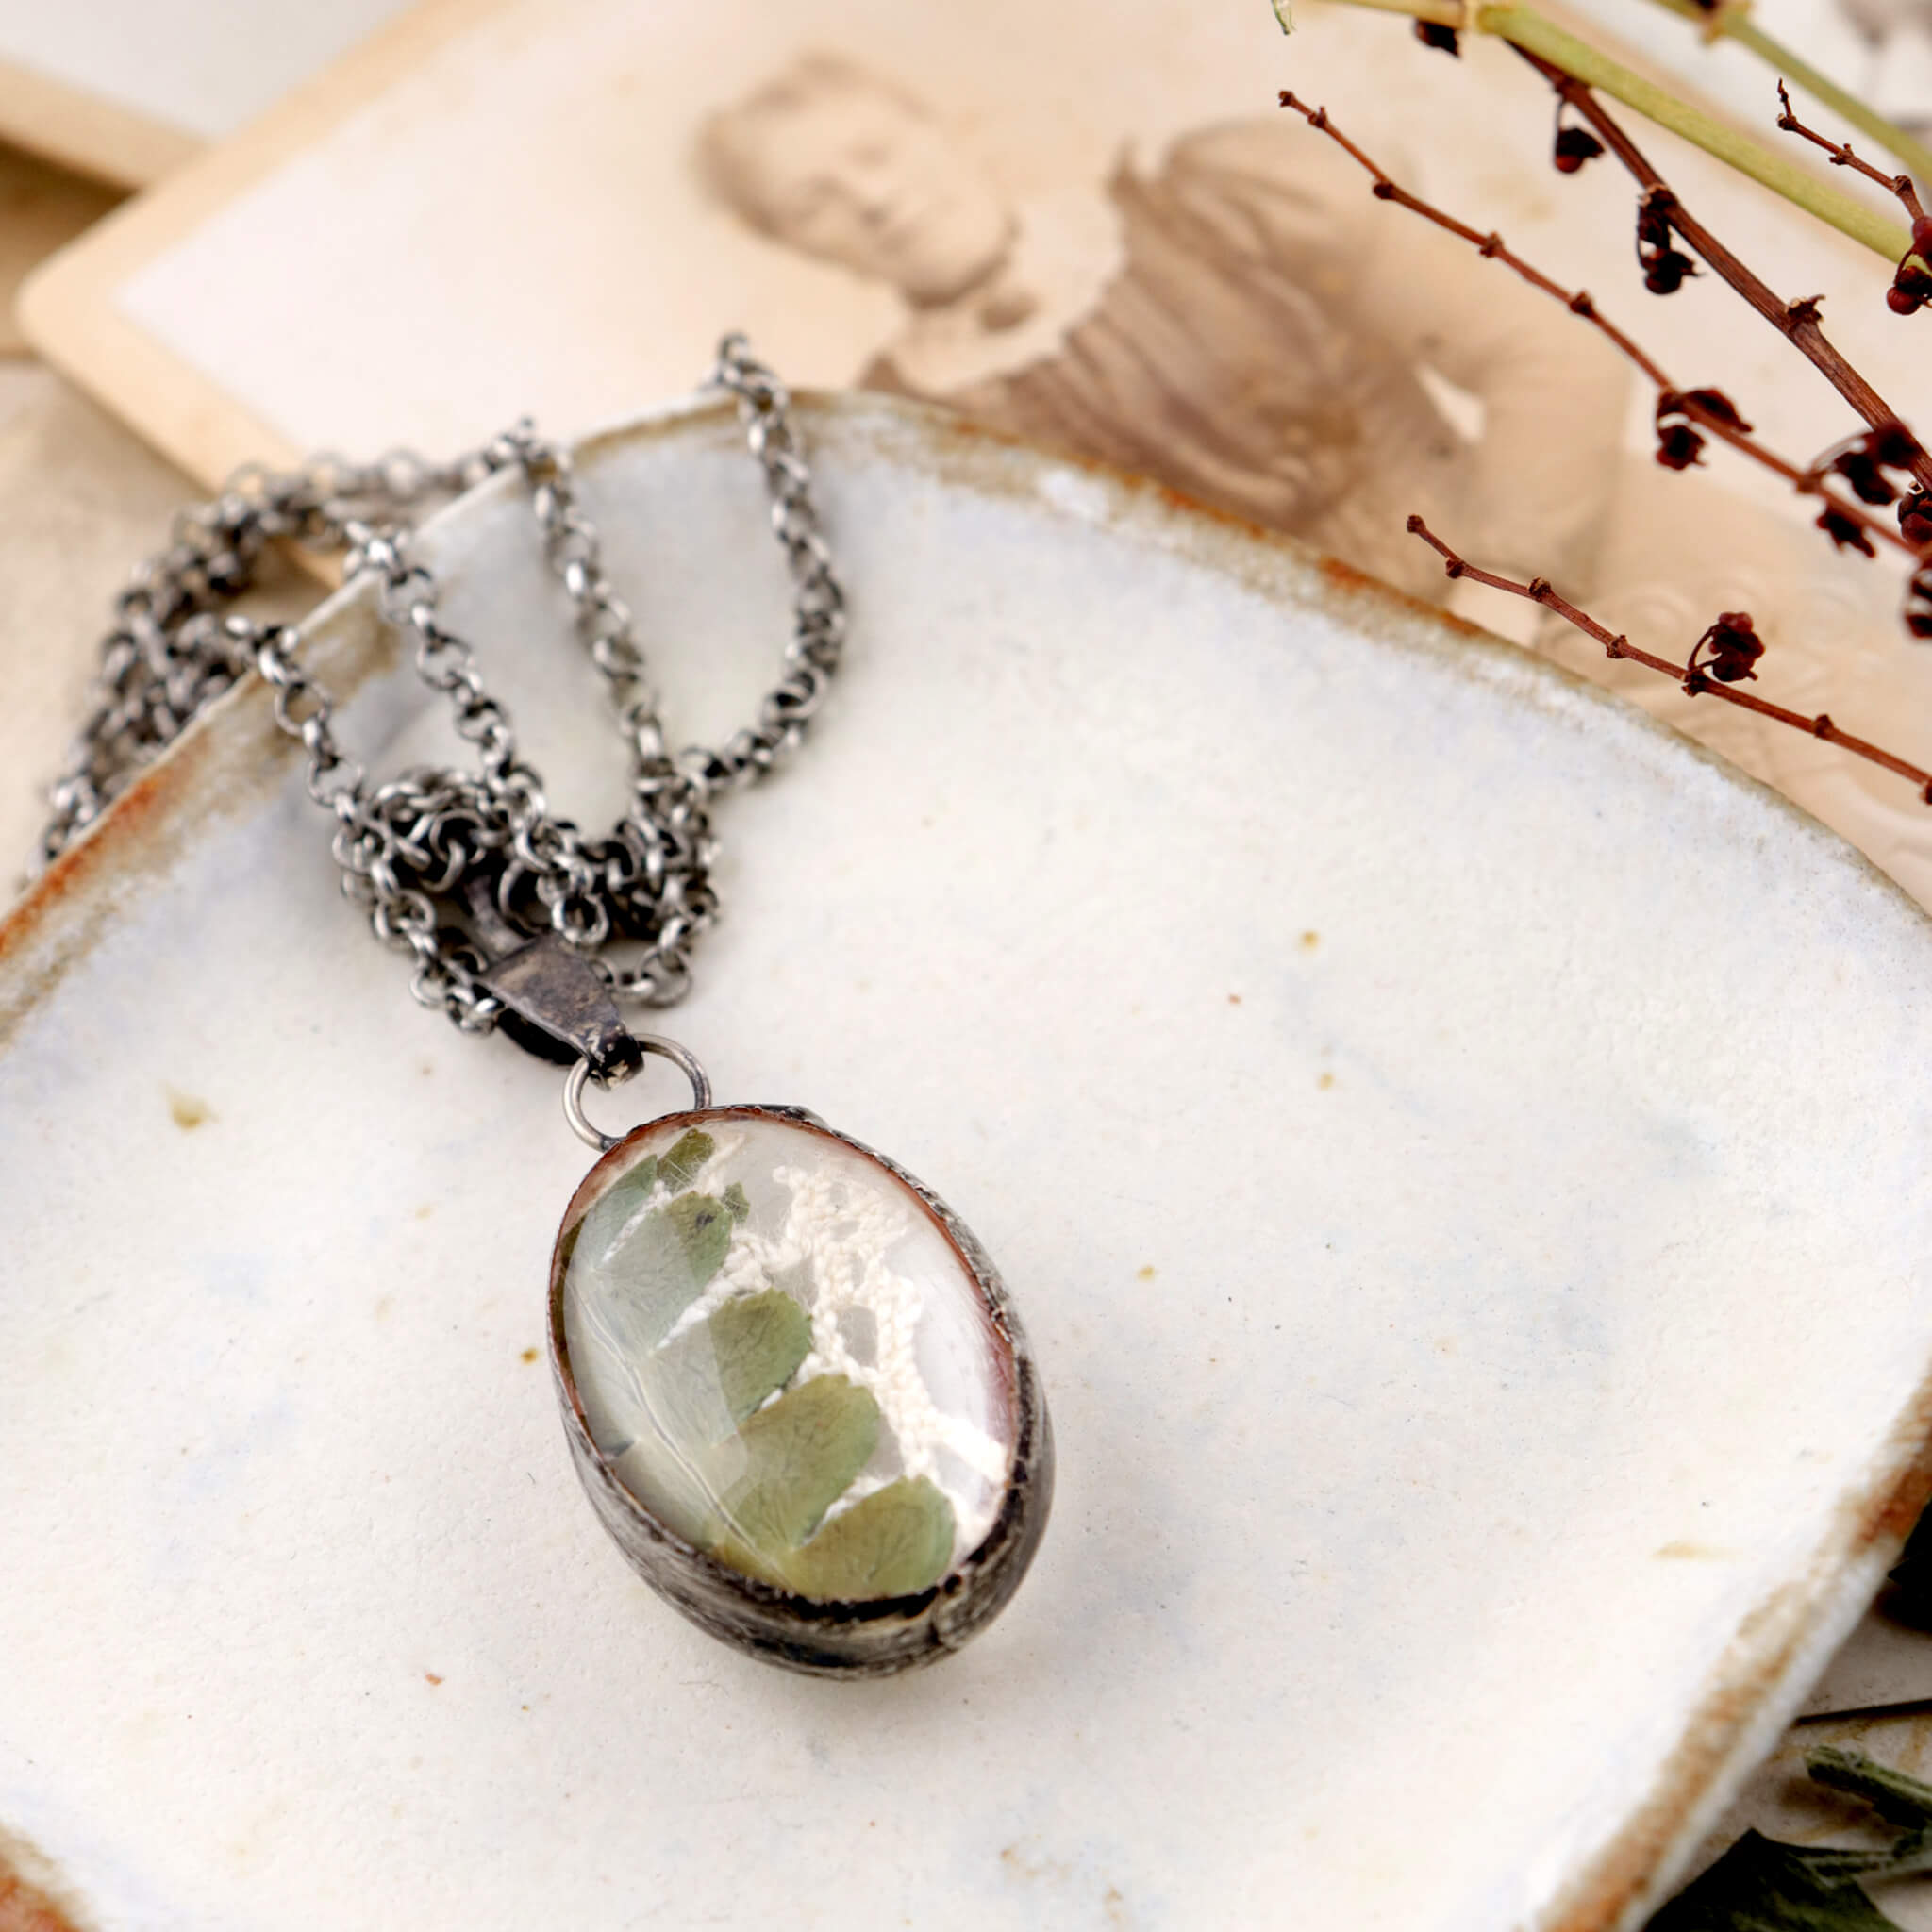 Oval necklace with pressed fern lying on a ceramic plate